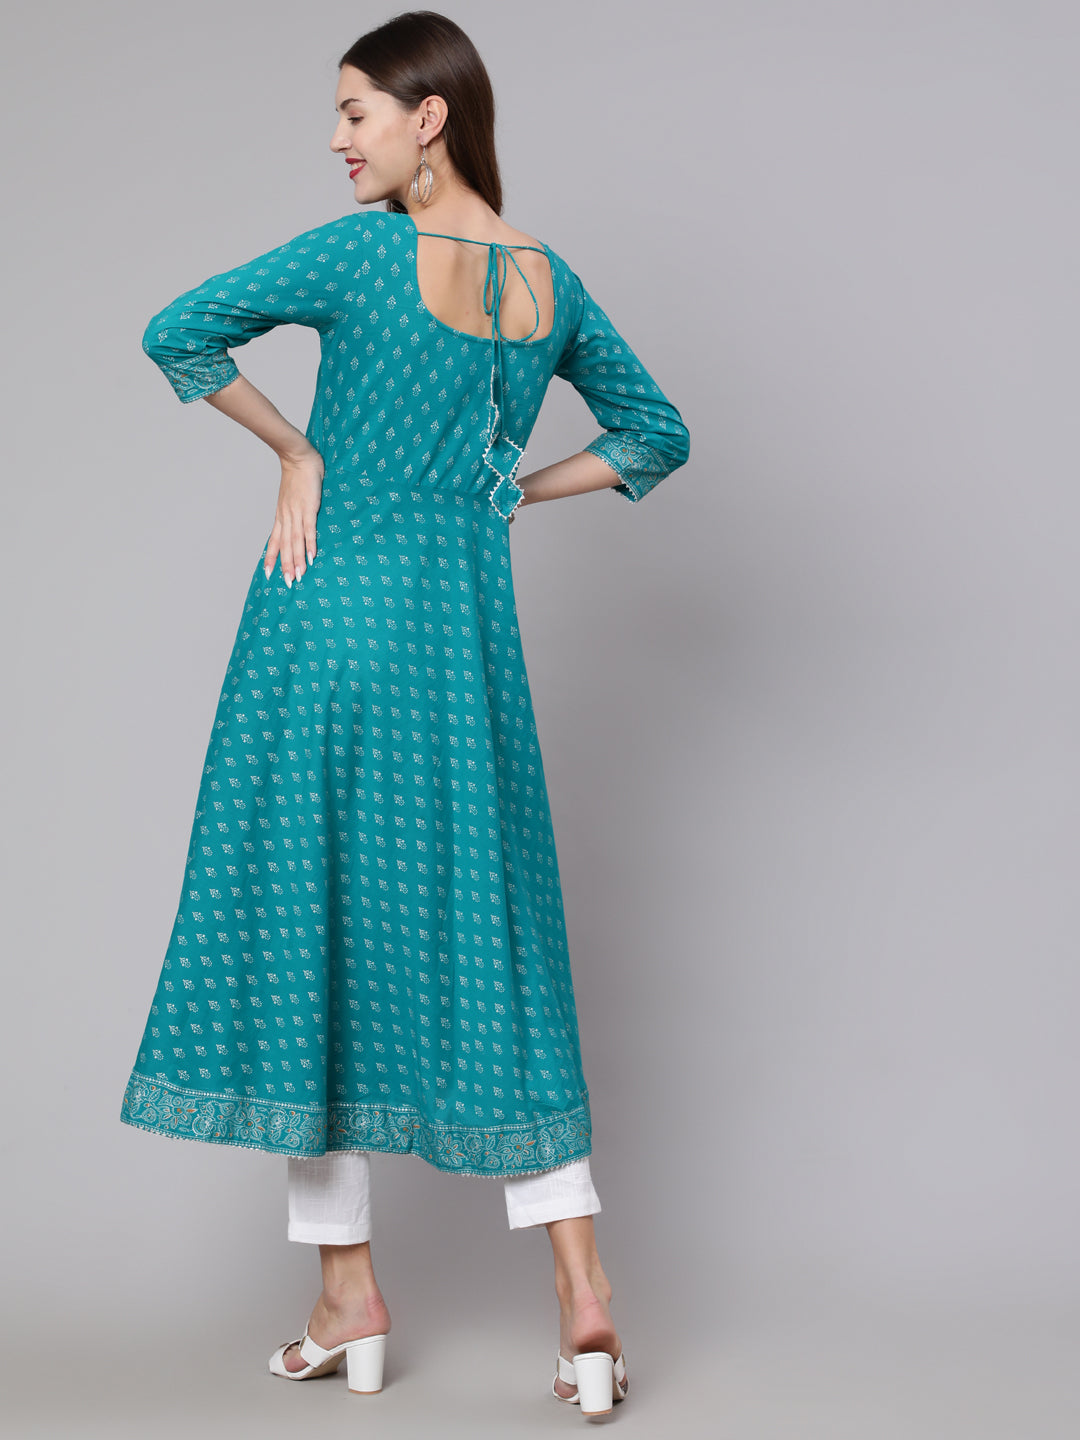 Women's Green Ethnic Printed Dress With Three Quarter Sleeves - Nayo Clothing